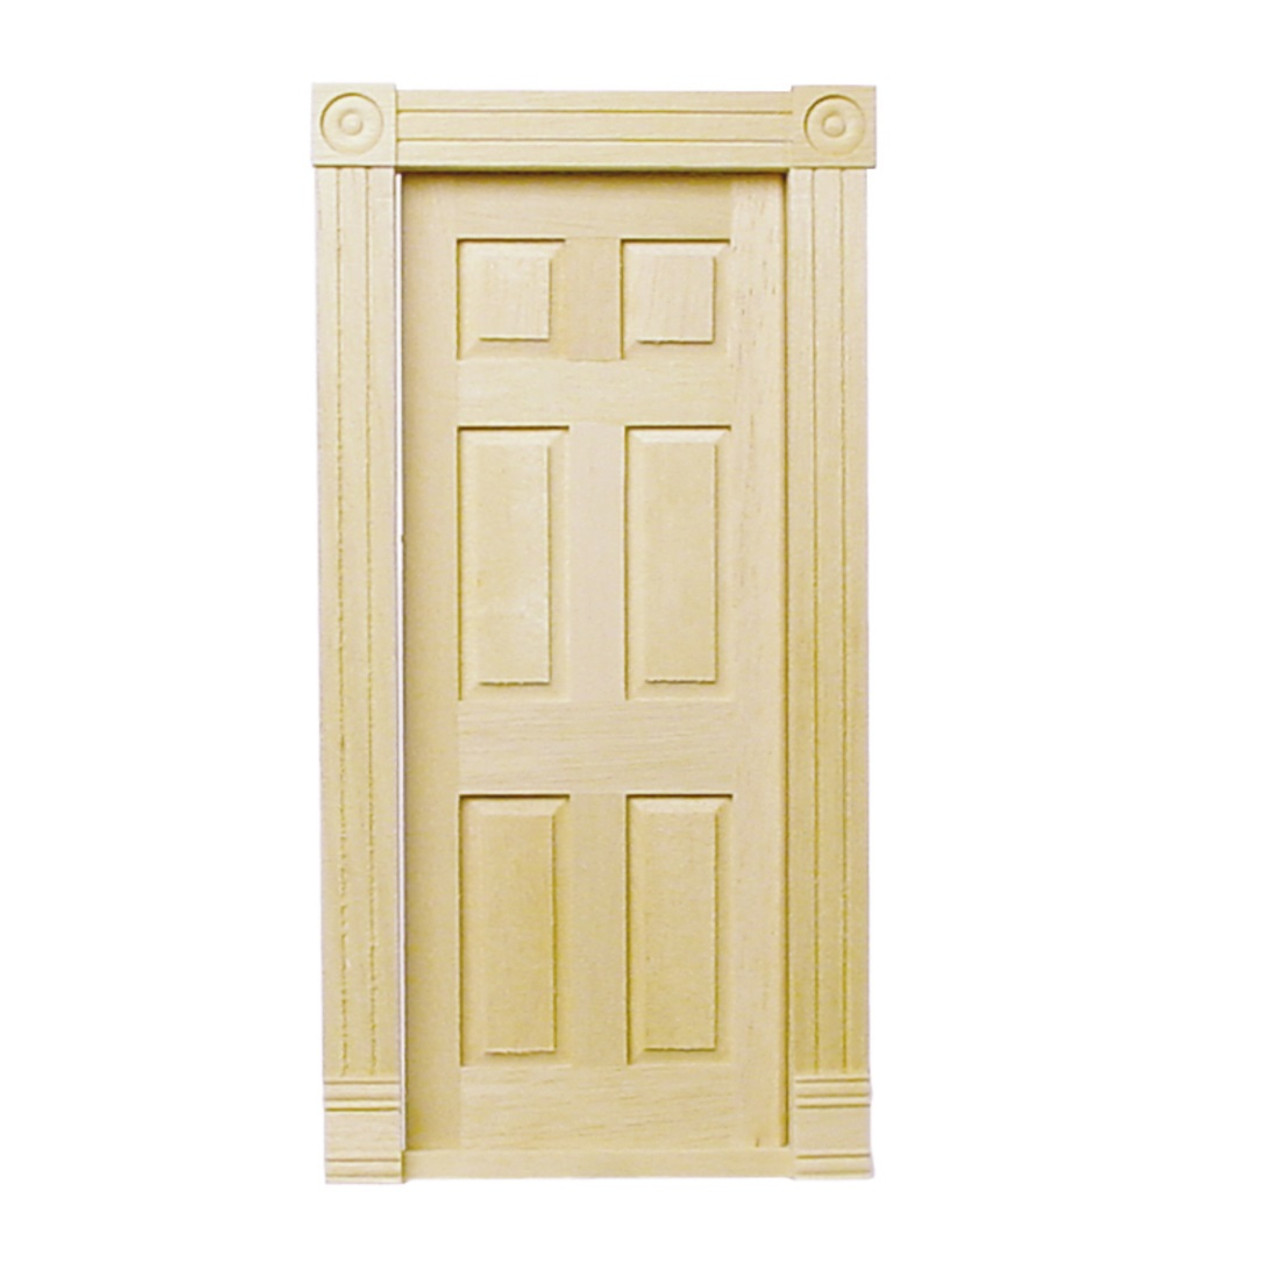 One-inch (1:12) Scale Dollhouse Miniature Traditional Block and Trim Interior Door (HW6025)